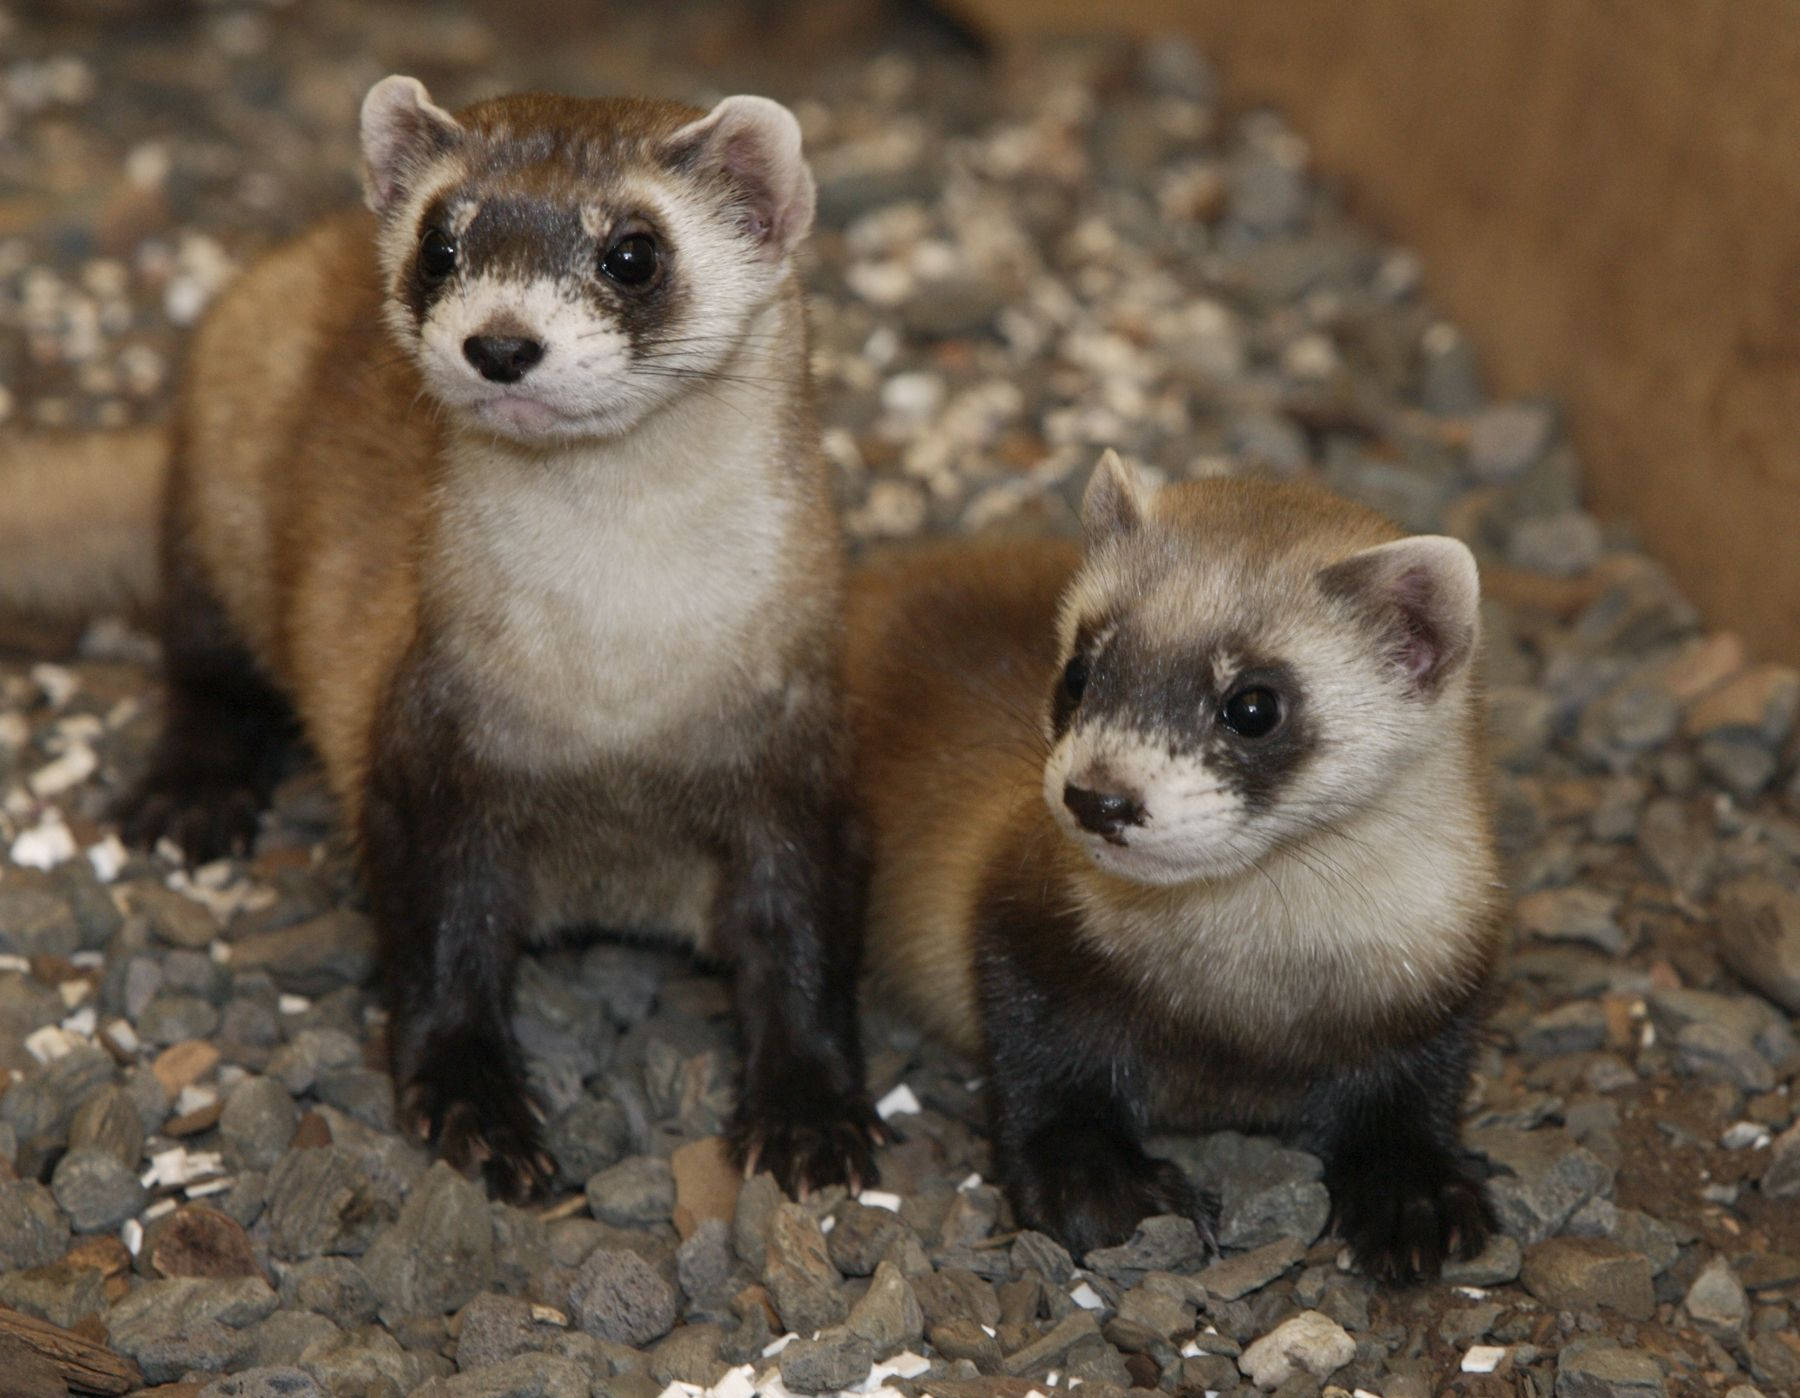 A Close-up Image Of A Black-footed Ferret Background